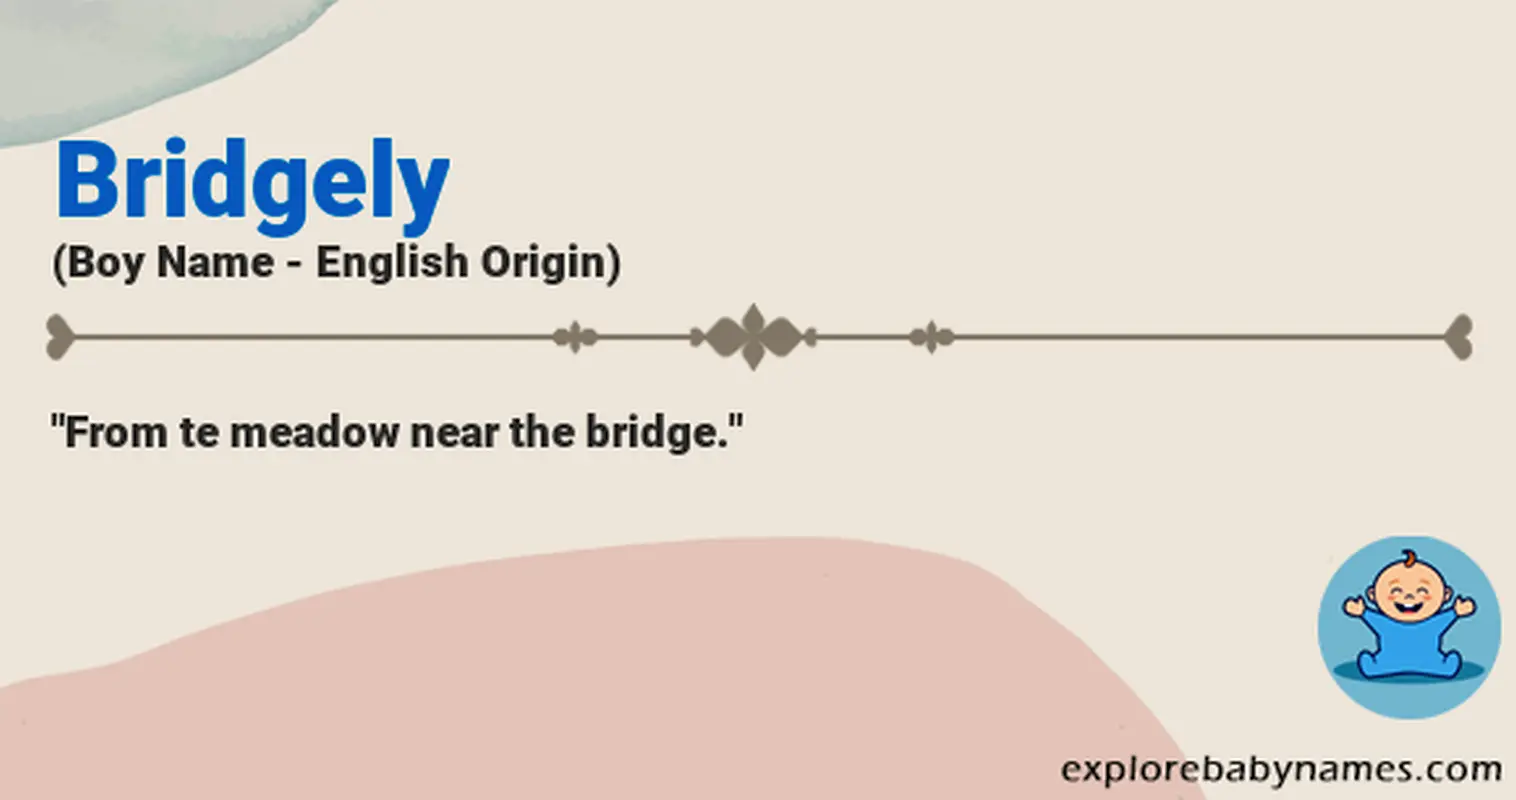 Meaning of Bridgely